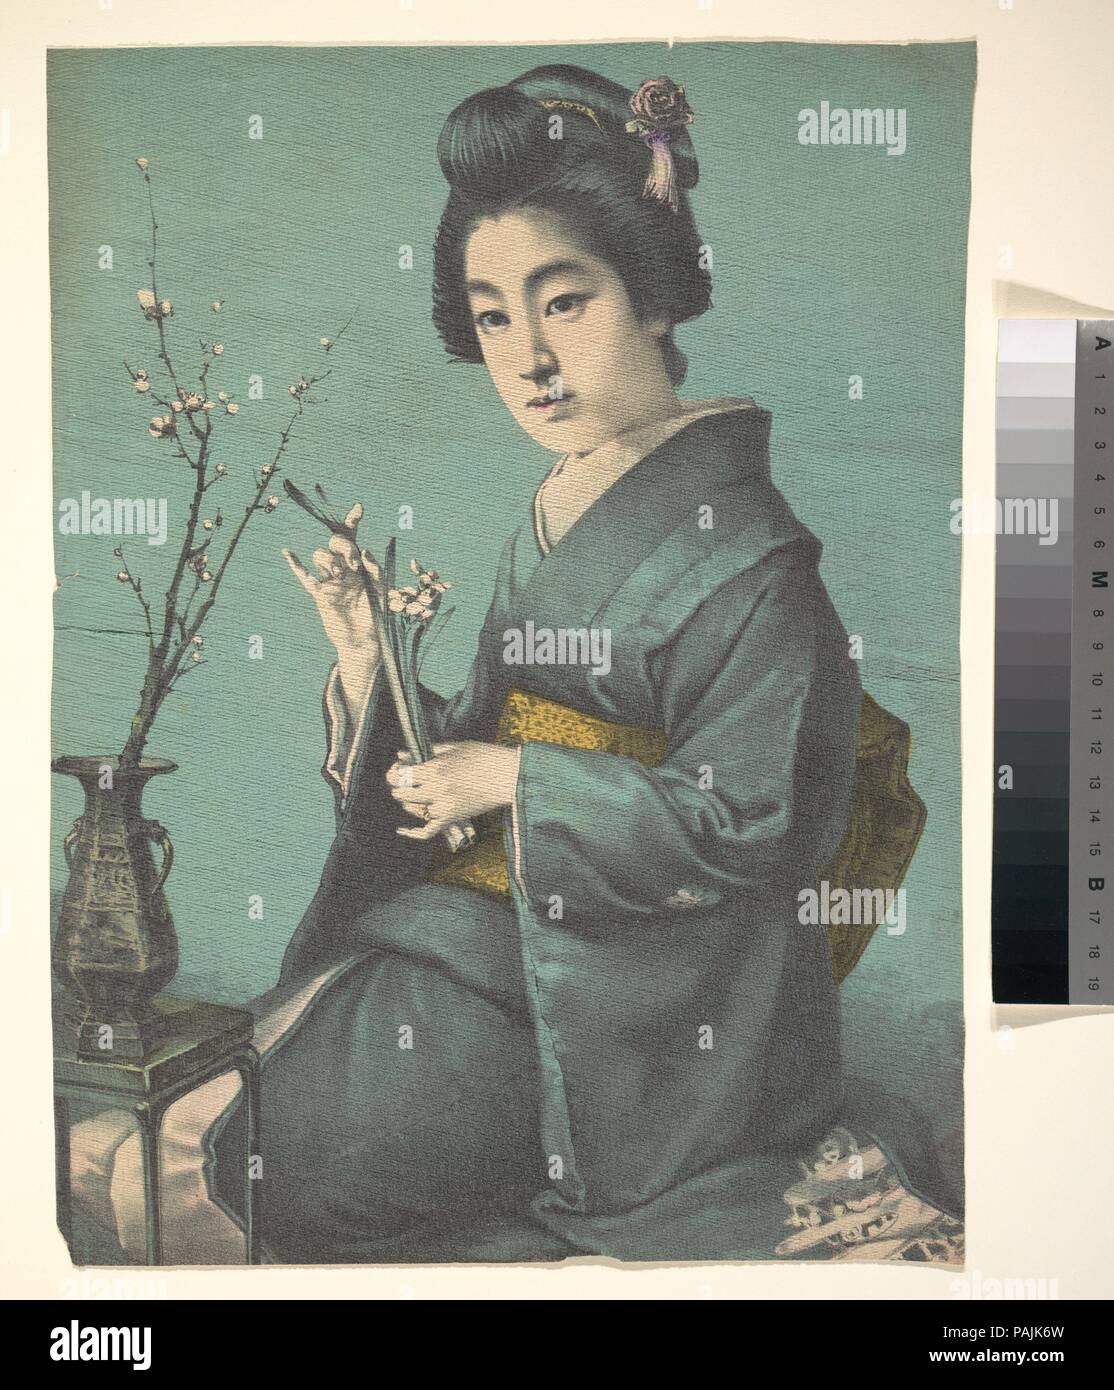 Girl with Plum Blossoms. Artist: Unidentified Artist; Hugechi (Qugeci). Culture: Japan. Dimensions: 14 1/4 x 10 5/8 in. (36.2 x 27 cm). Date: ca. 1900?. Museum: Metropolitan Museum of Art, New York, USA. Stock Photo